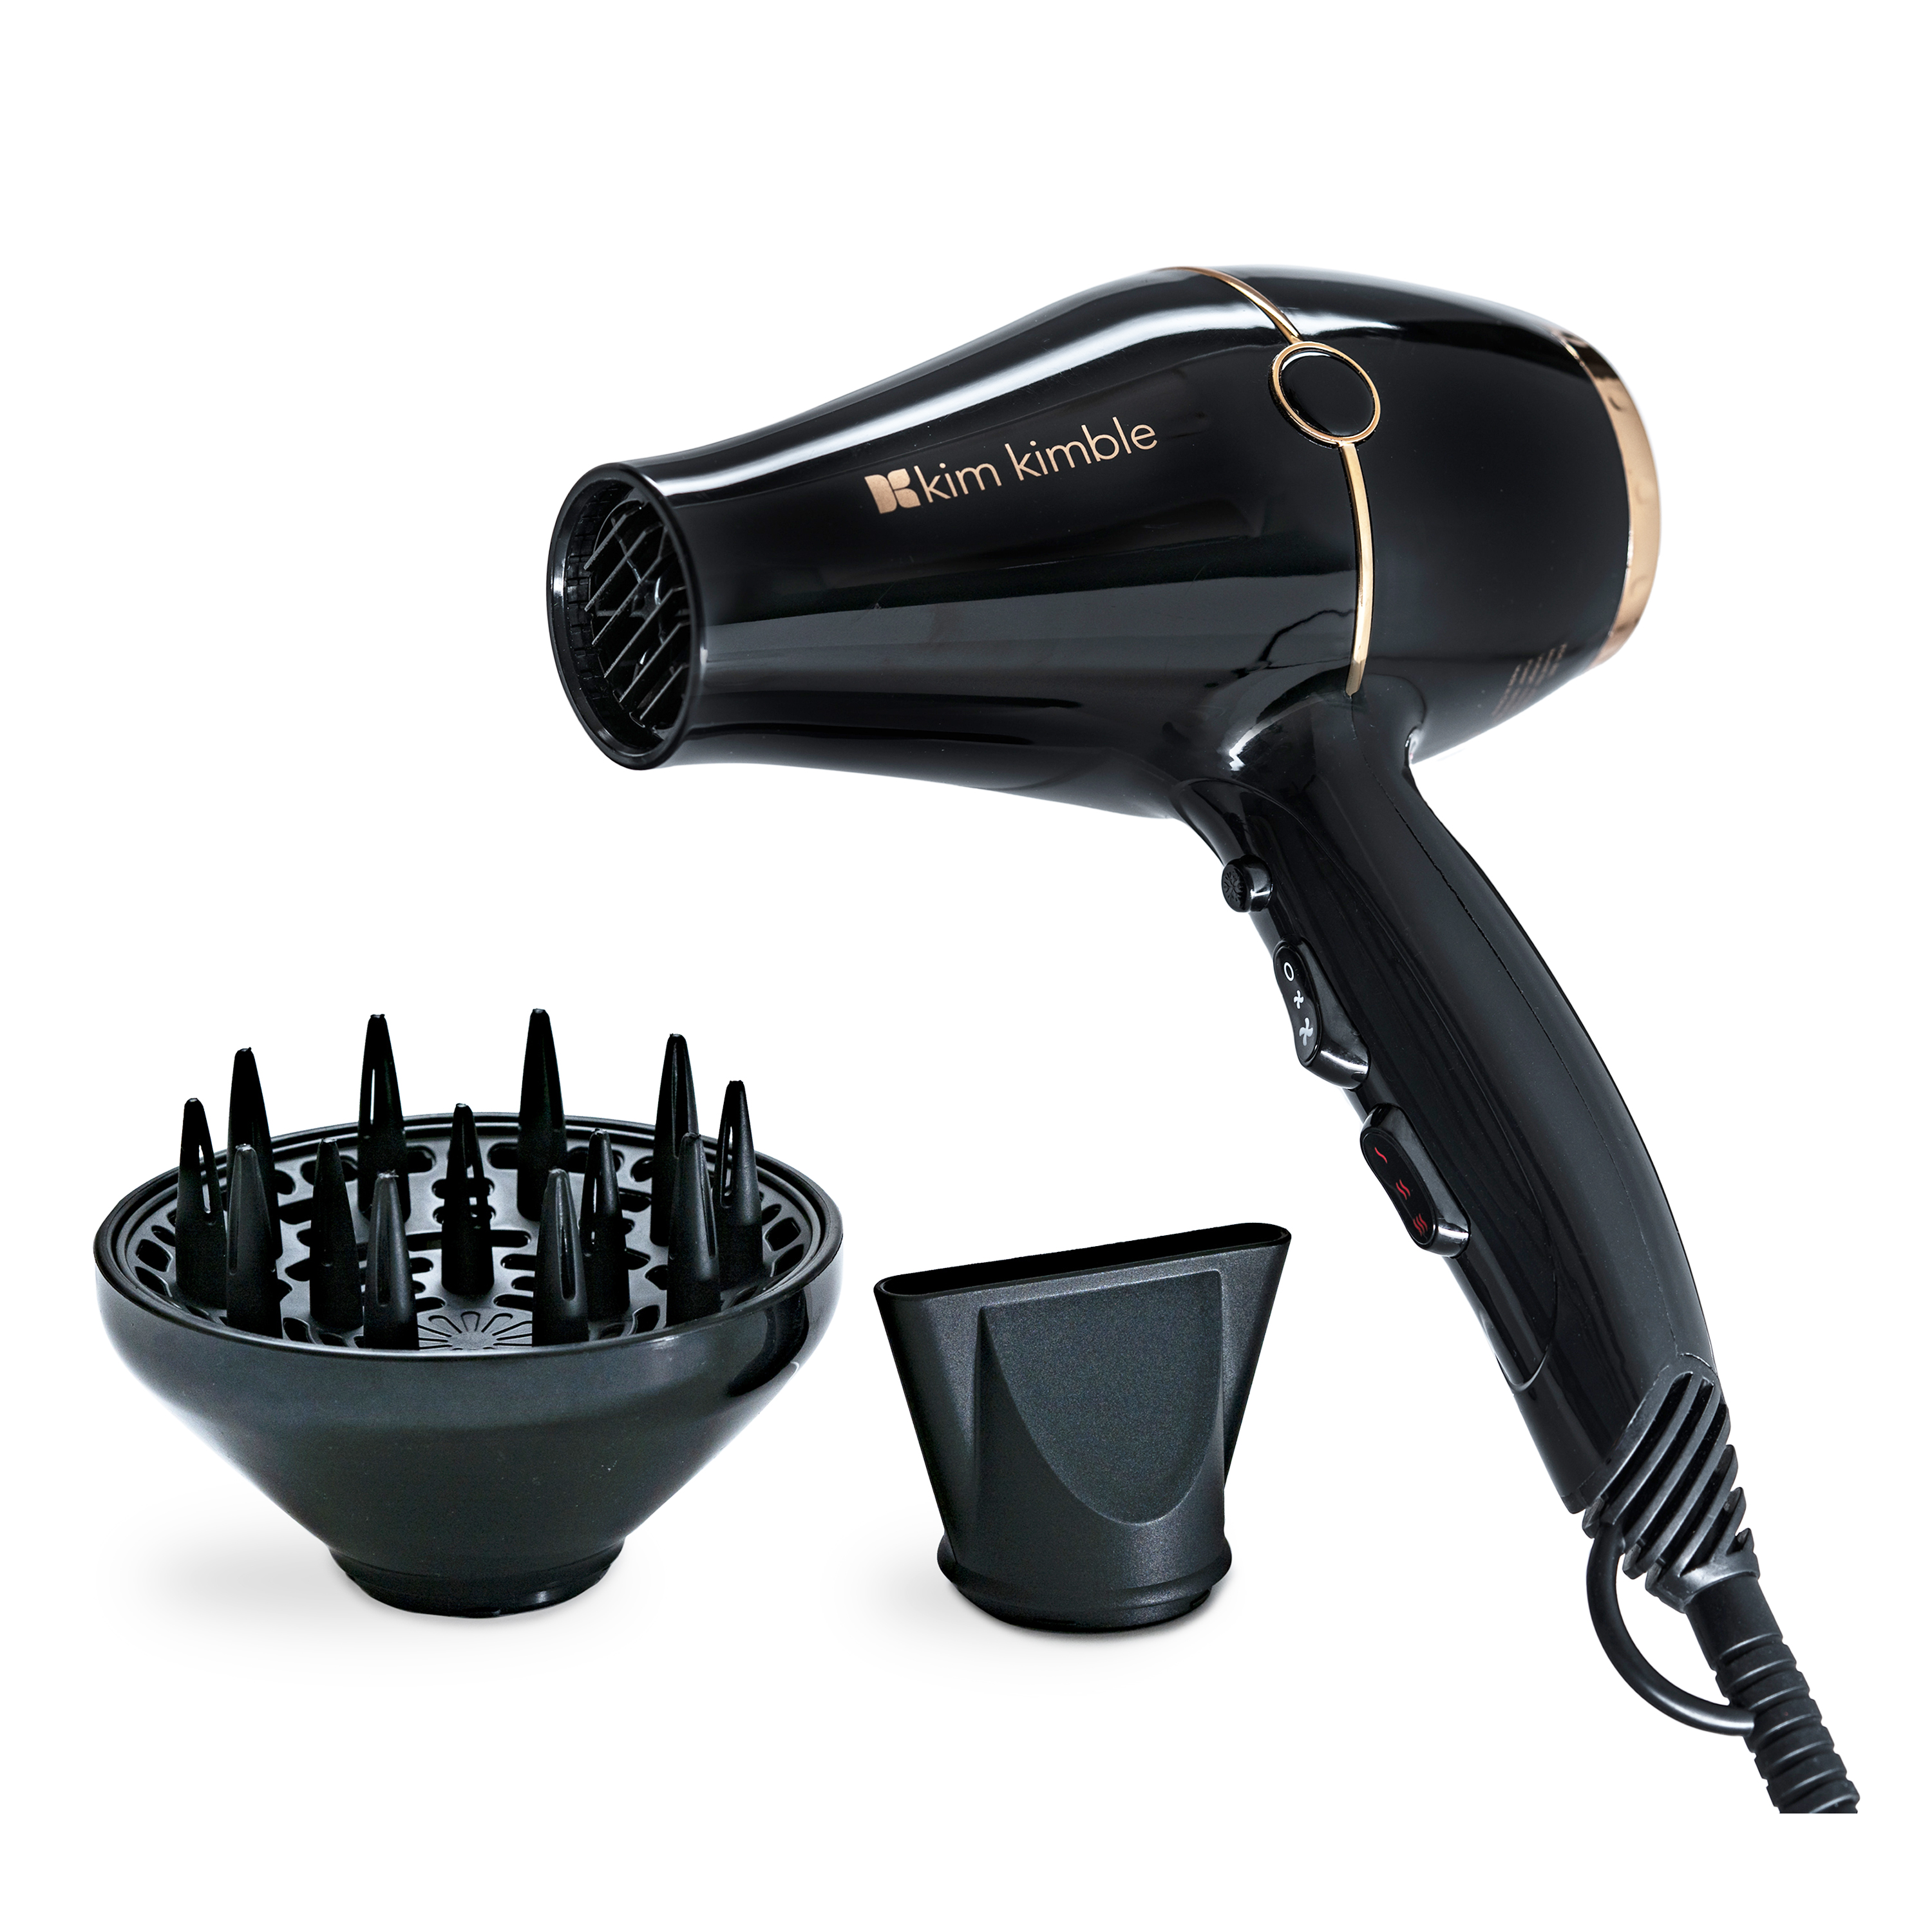 Kim Kimble Celebrity Series Ultra-Light 1875W Pro Hair Dryer, Black & Rose Gold with Concentrator and Diffuser - image 1 of 14